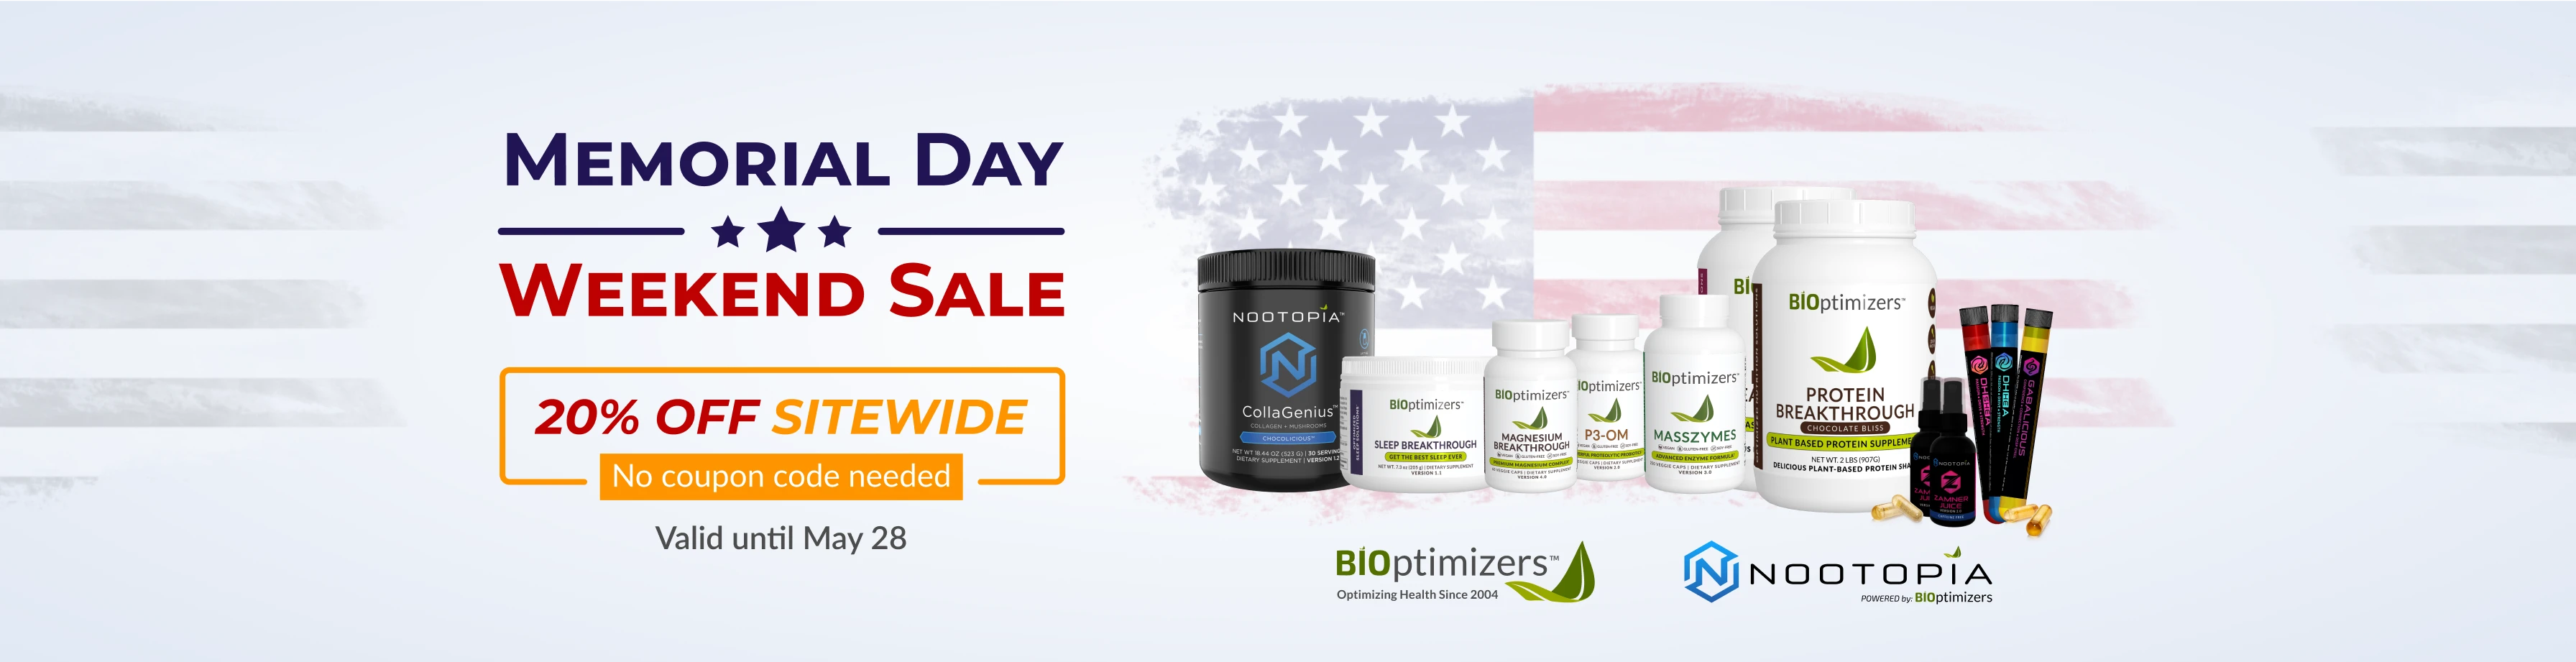 Memorial Day 20% OFF Sitewide